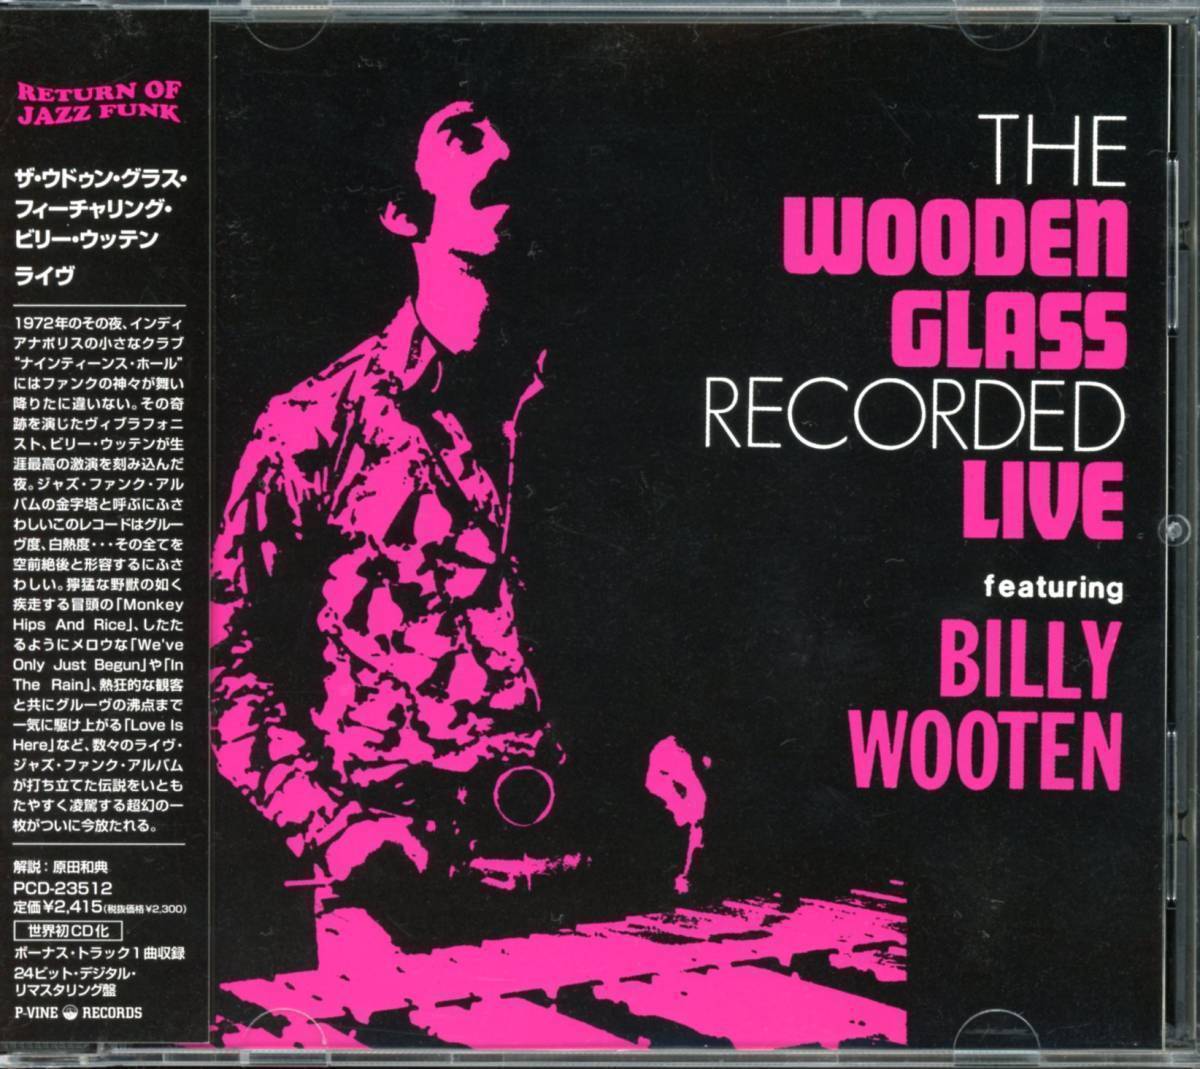 Rare Groove/Jazz Funk■The Wooden Glass Feat. Billy Wooten / Recorded Live +1 (1972) 廃盤 Return Of Jazz Funk リマスタリングの画像1